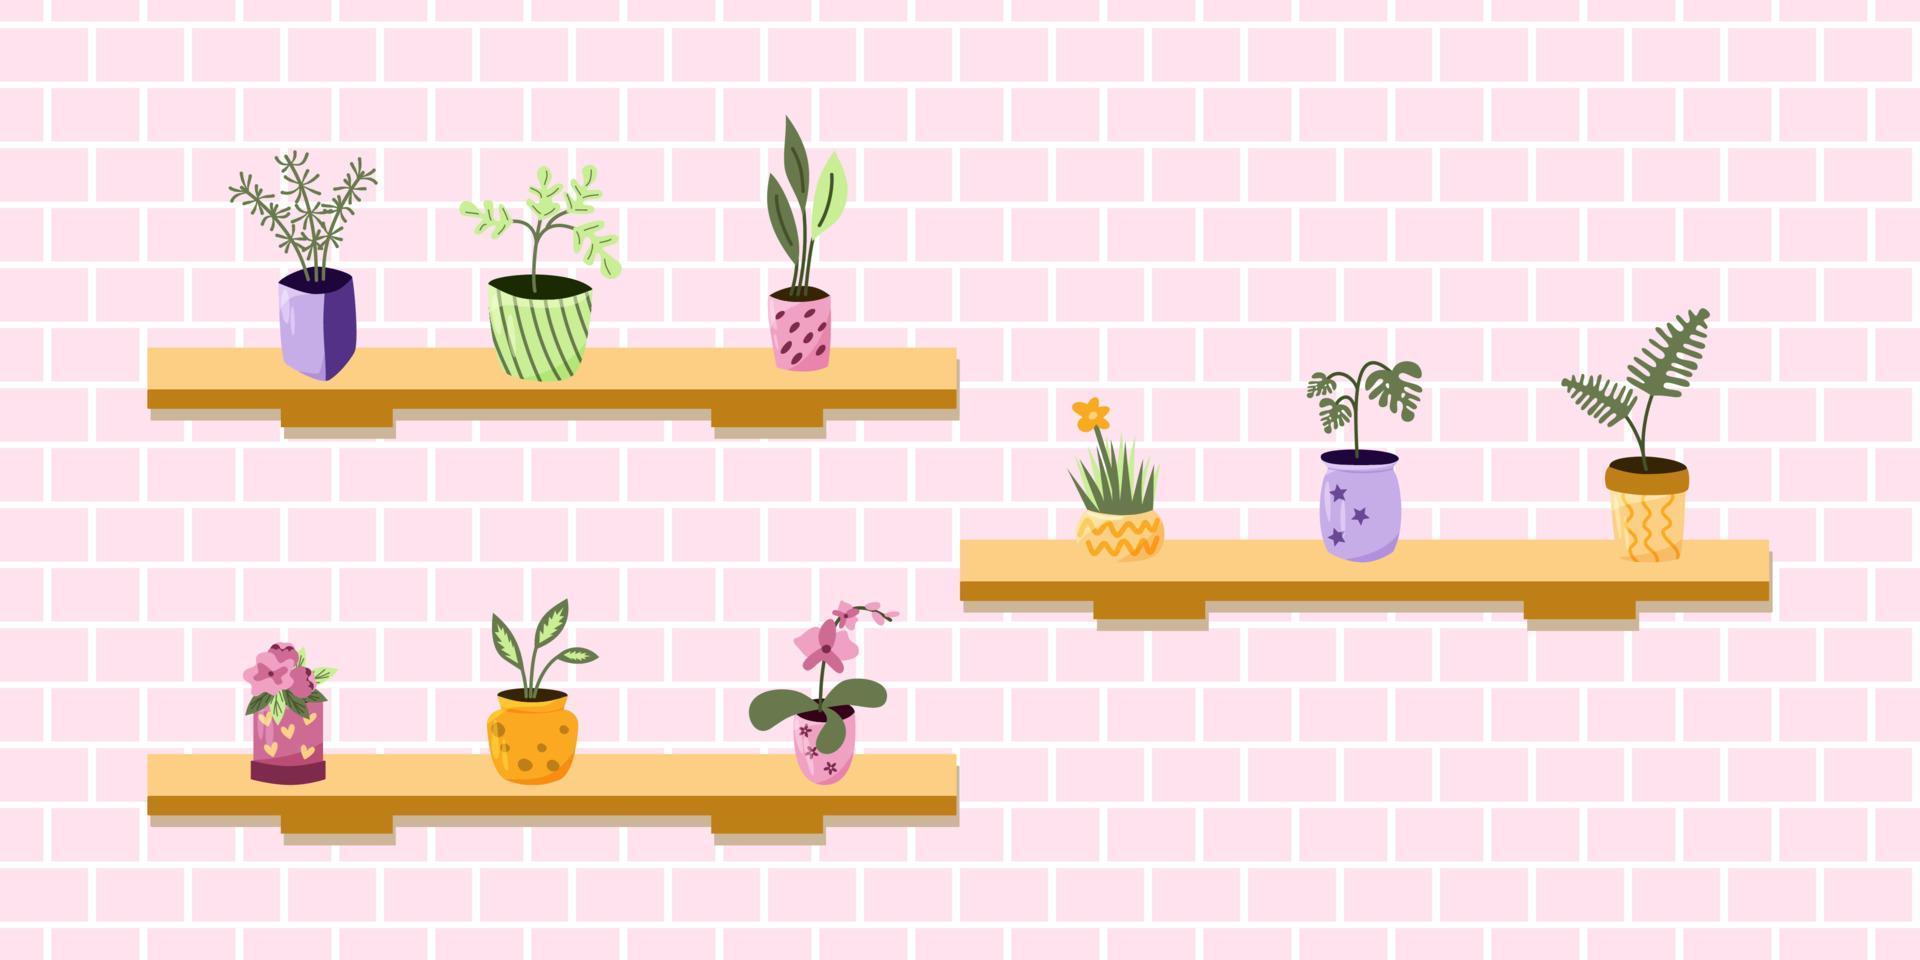 Flowers in colorful pots on the shelves. Vector illustration.